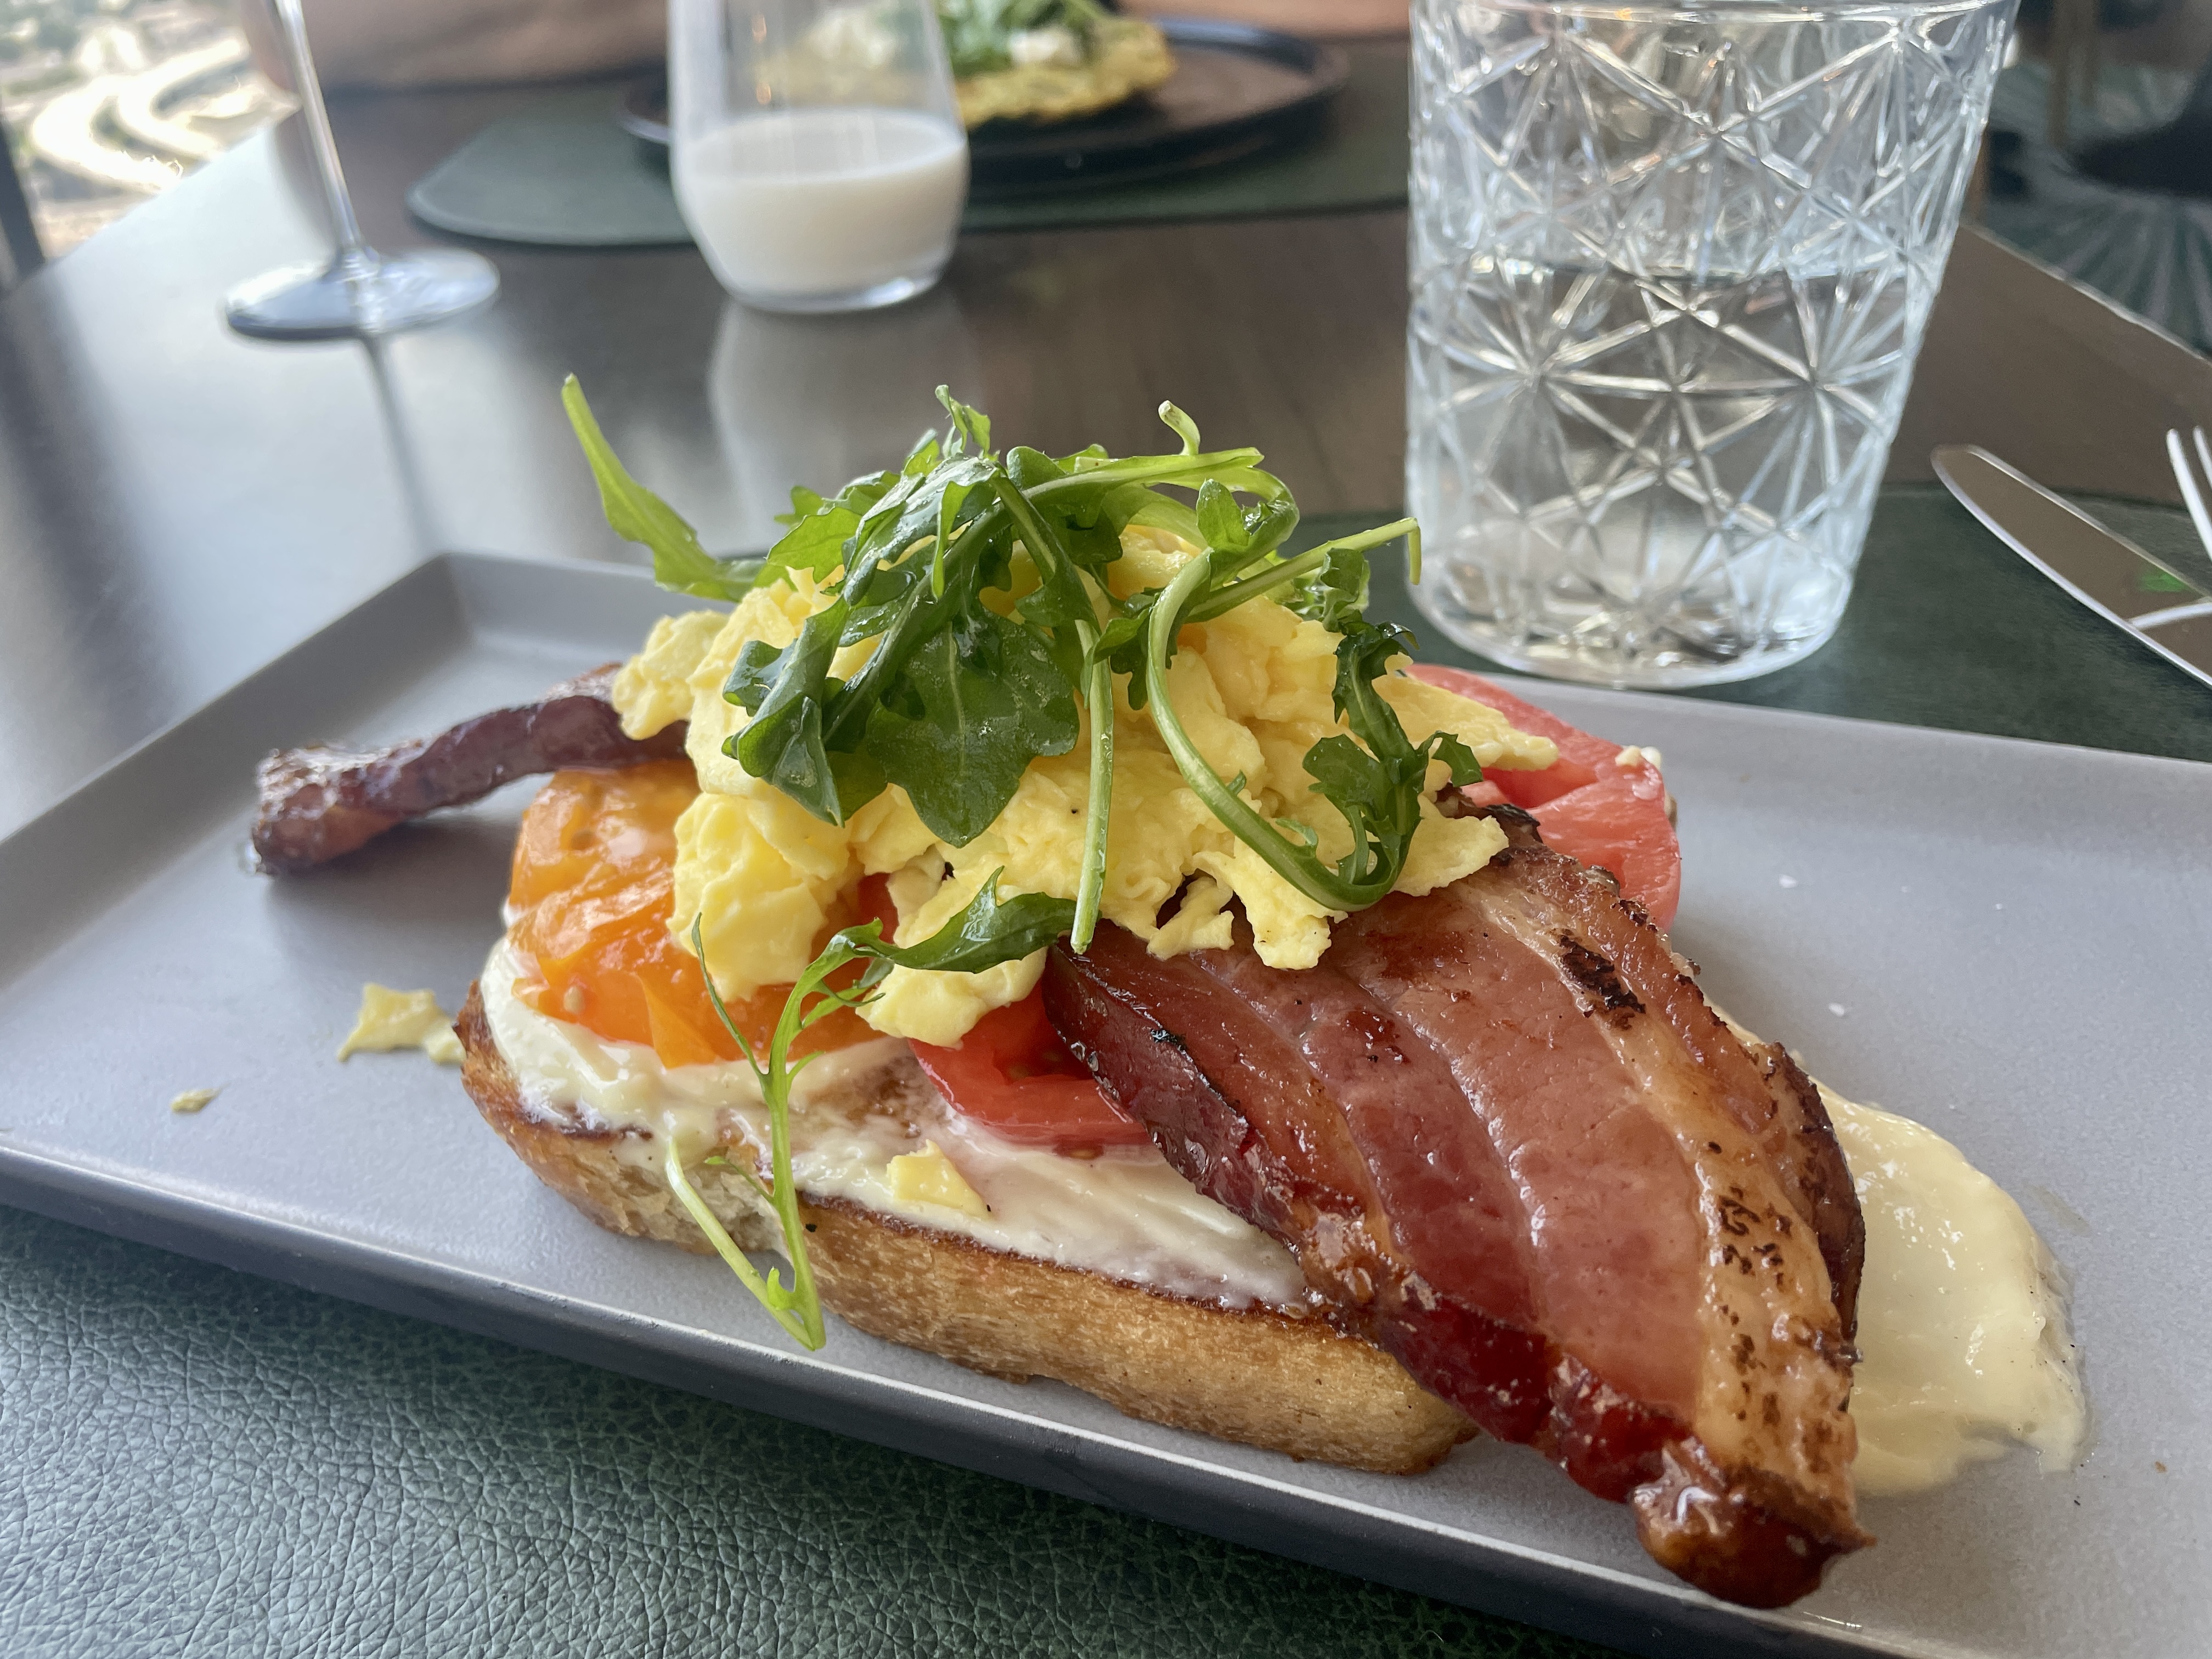 A plate holds a piece of toast with eggs, bacon, tomatoes, and lettuce.